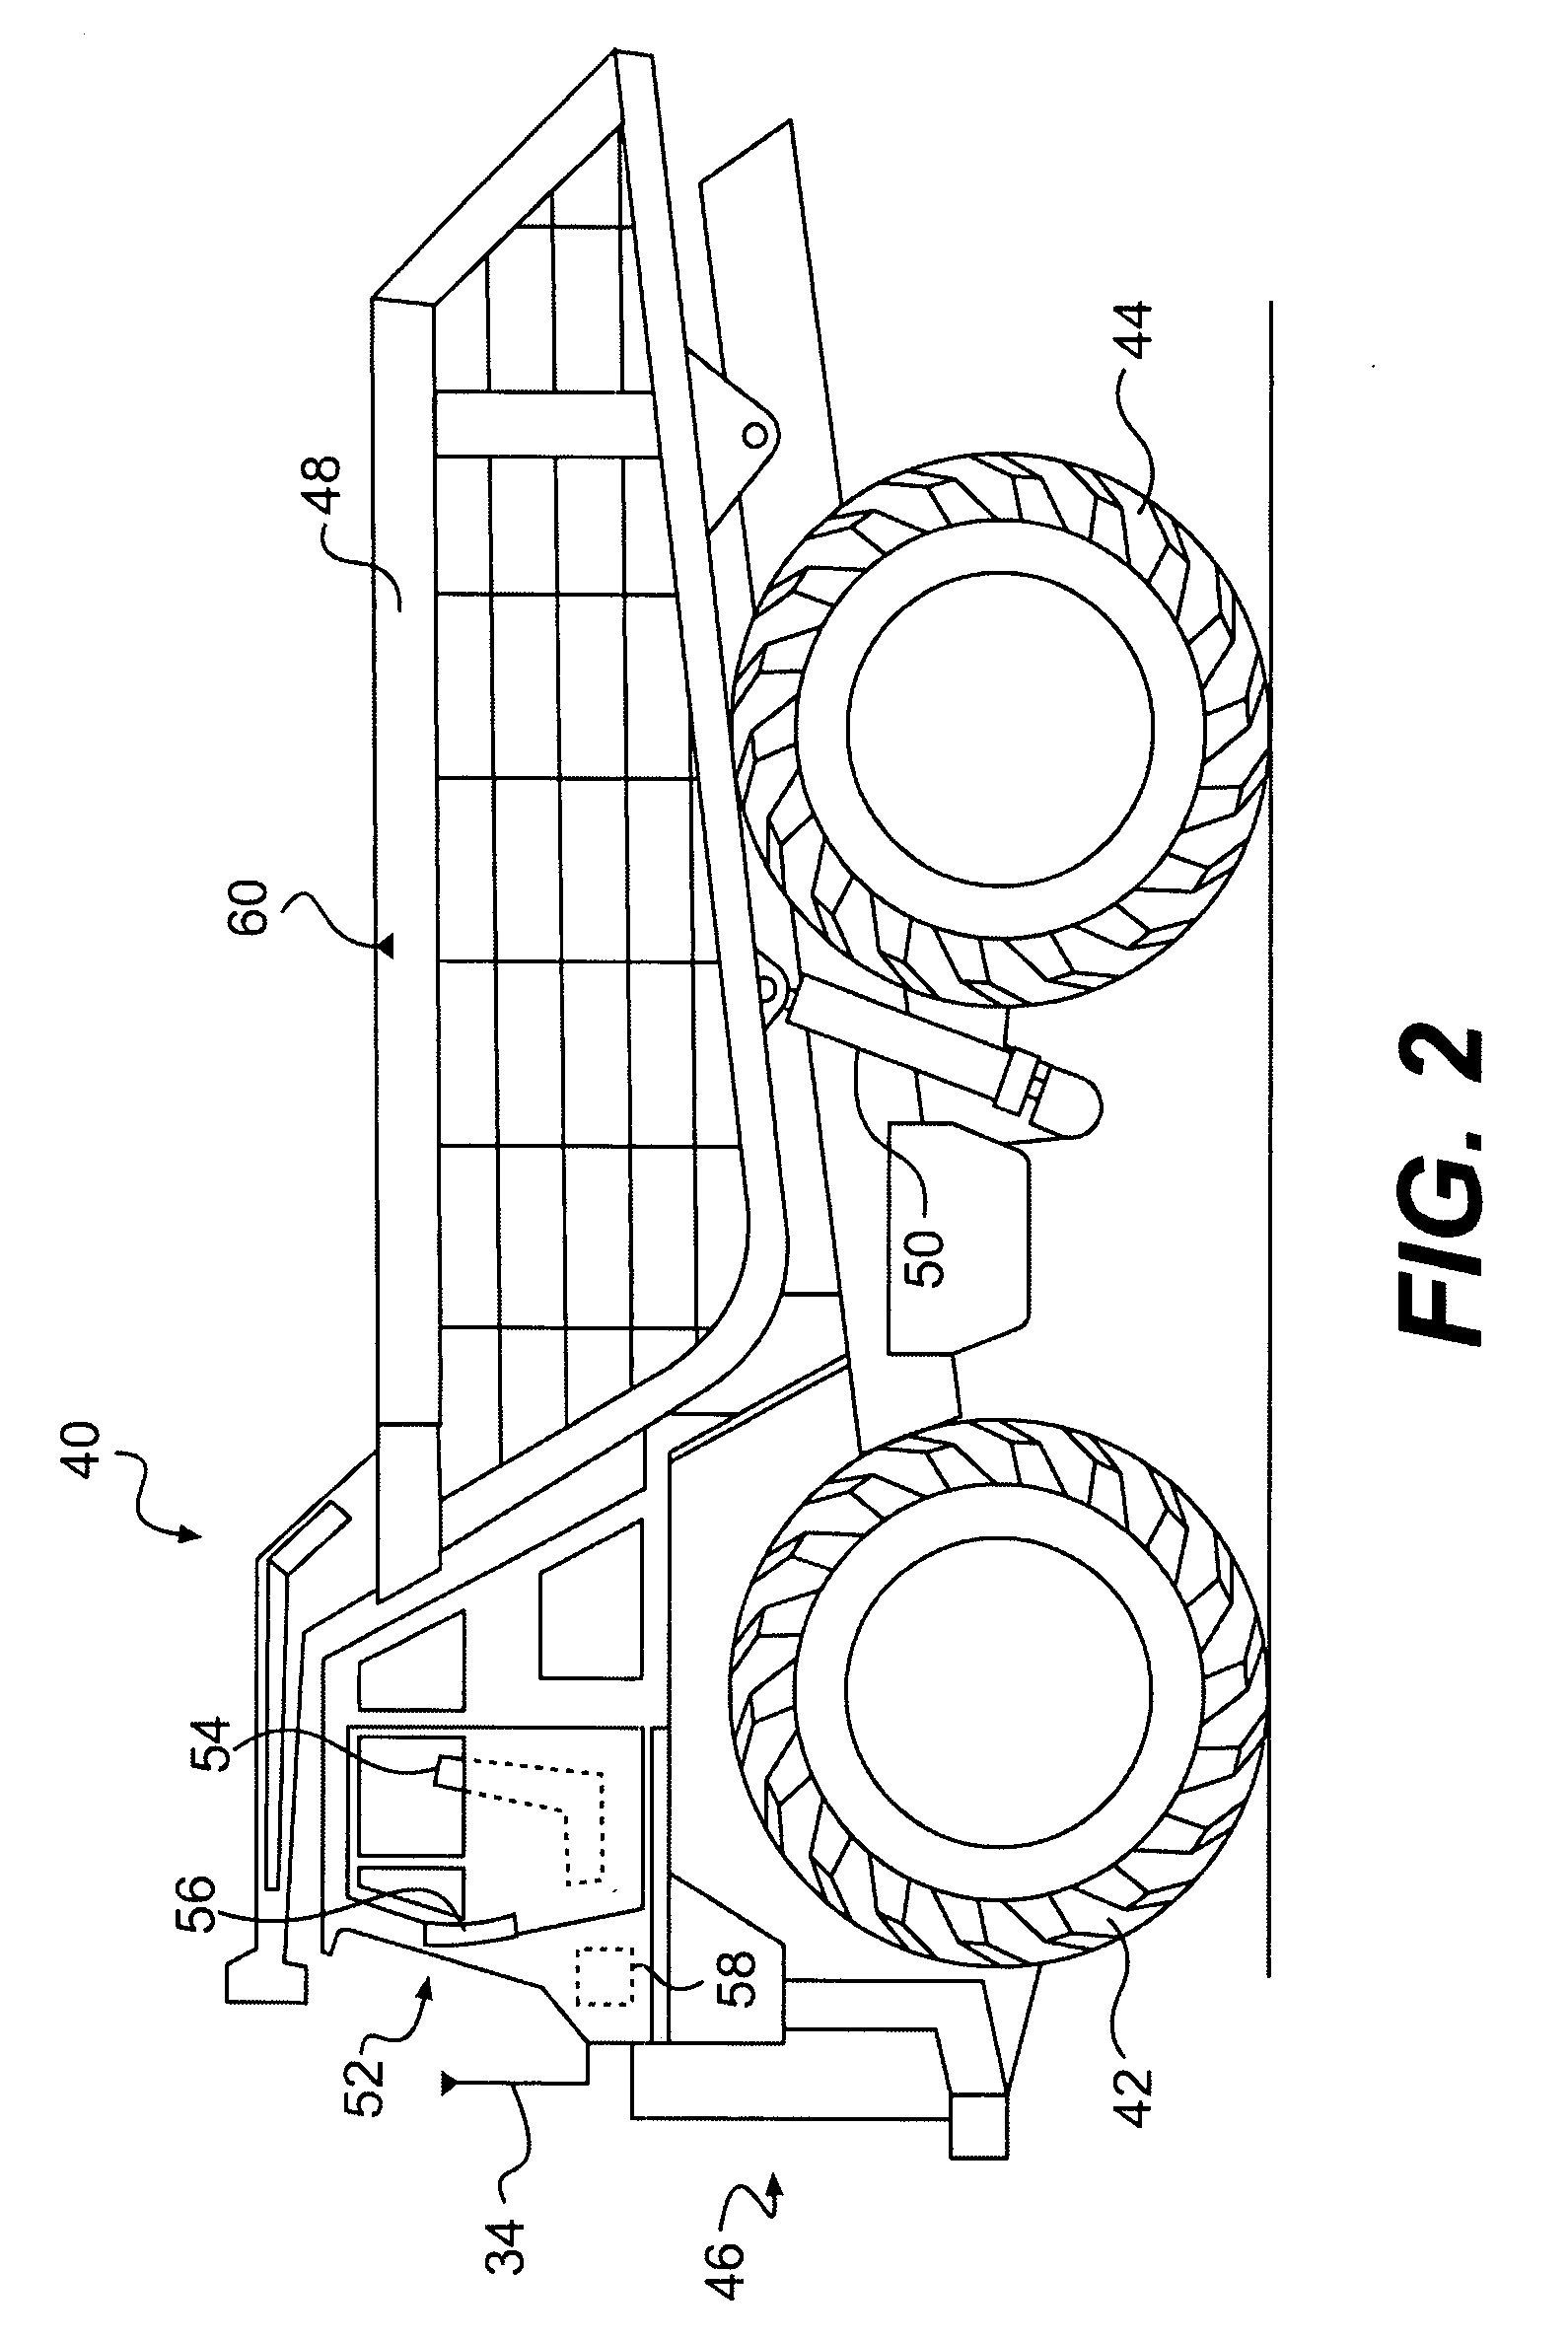 Machine to-machine communication system for payload control